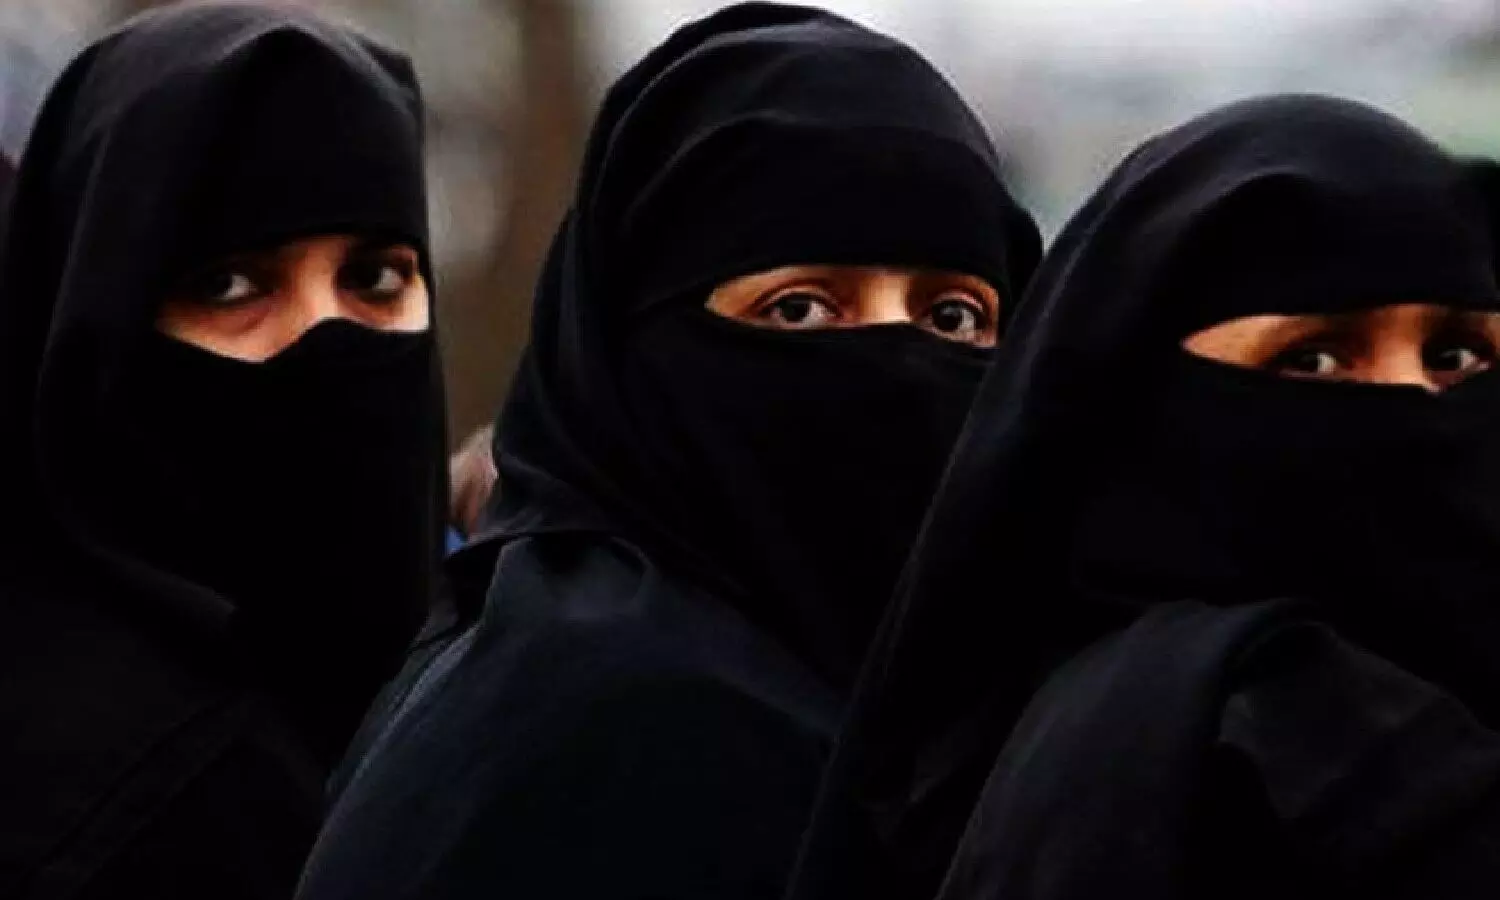 Triple talaq is not stopping even after enactment of law, if the part of additional dowry